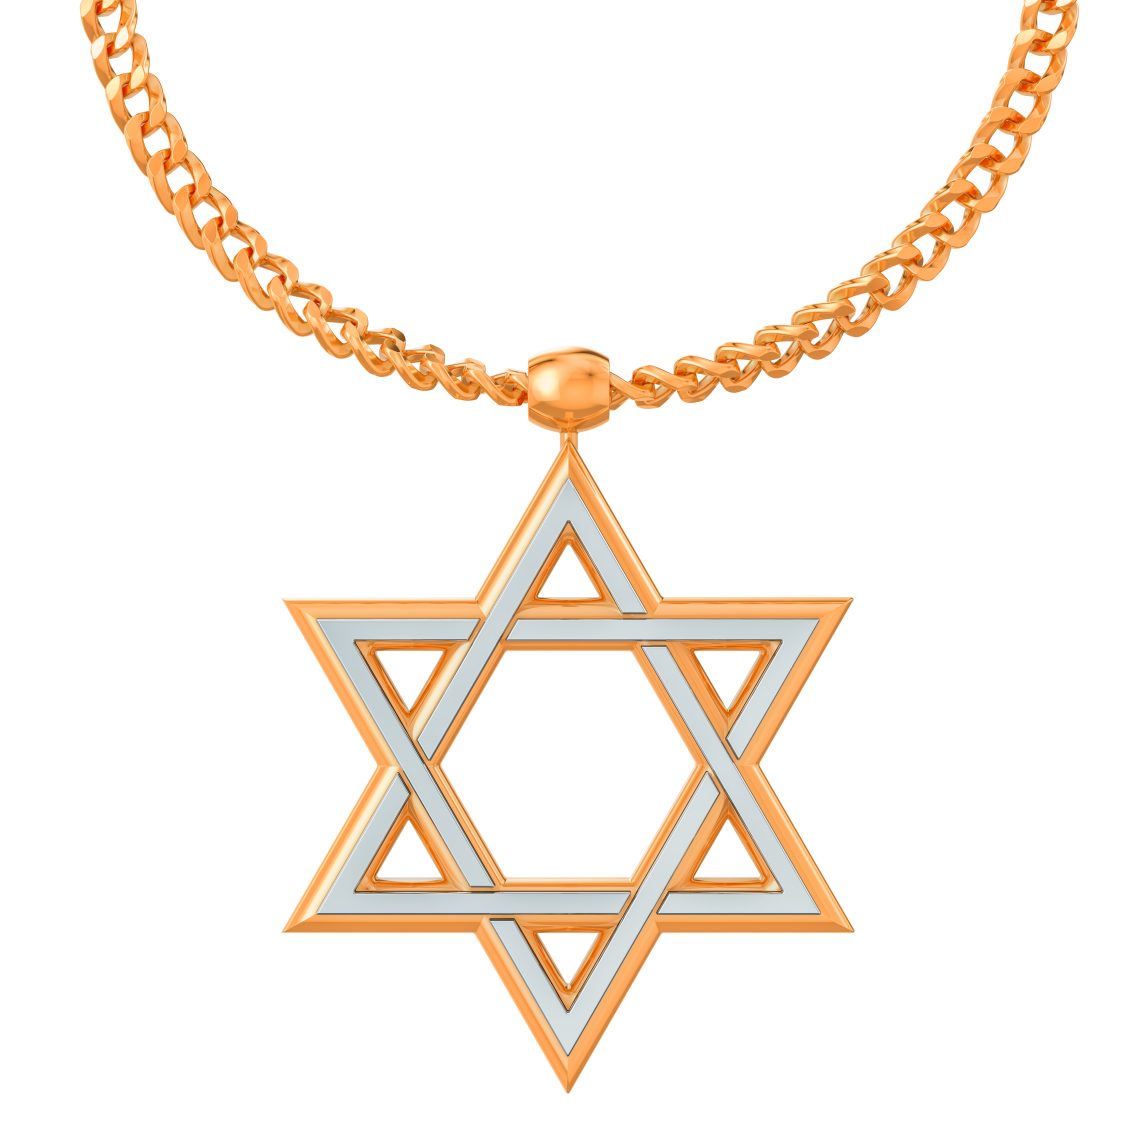 Jewish Jewelry and how it fits as a Rosh Hashanah Gift